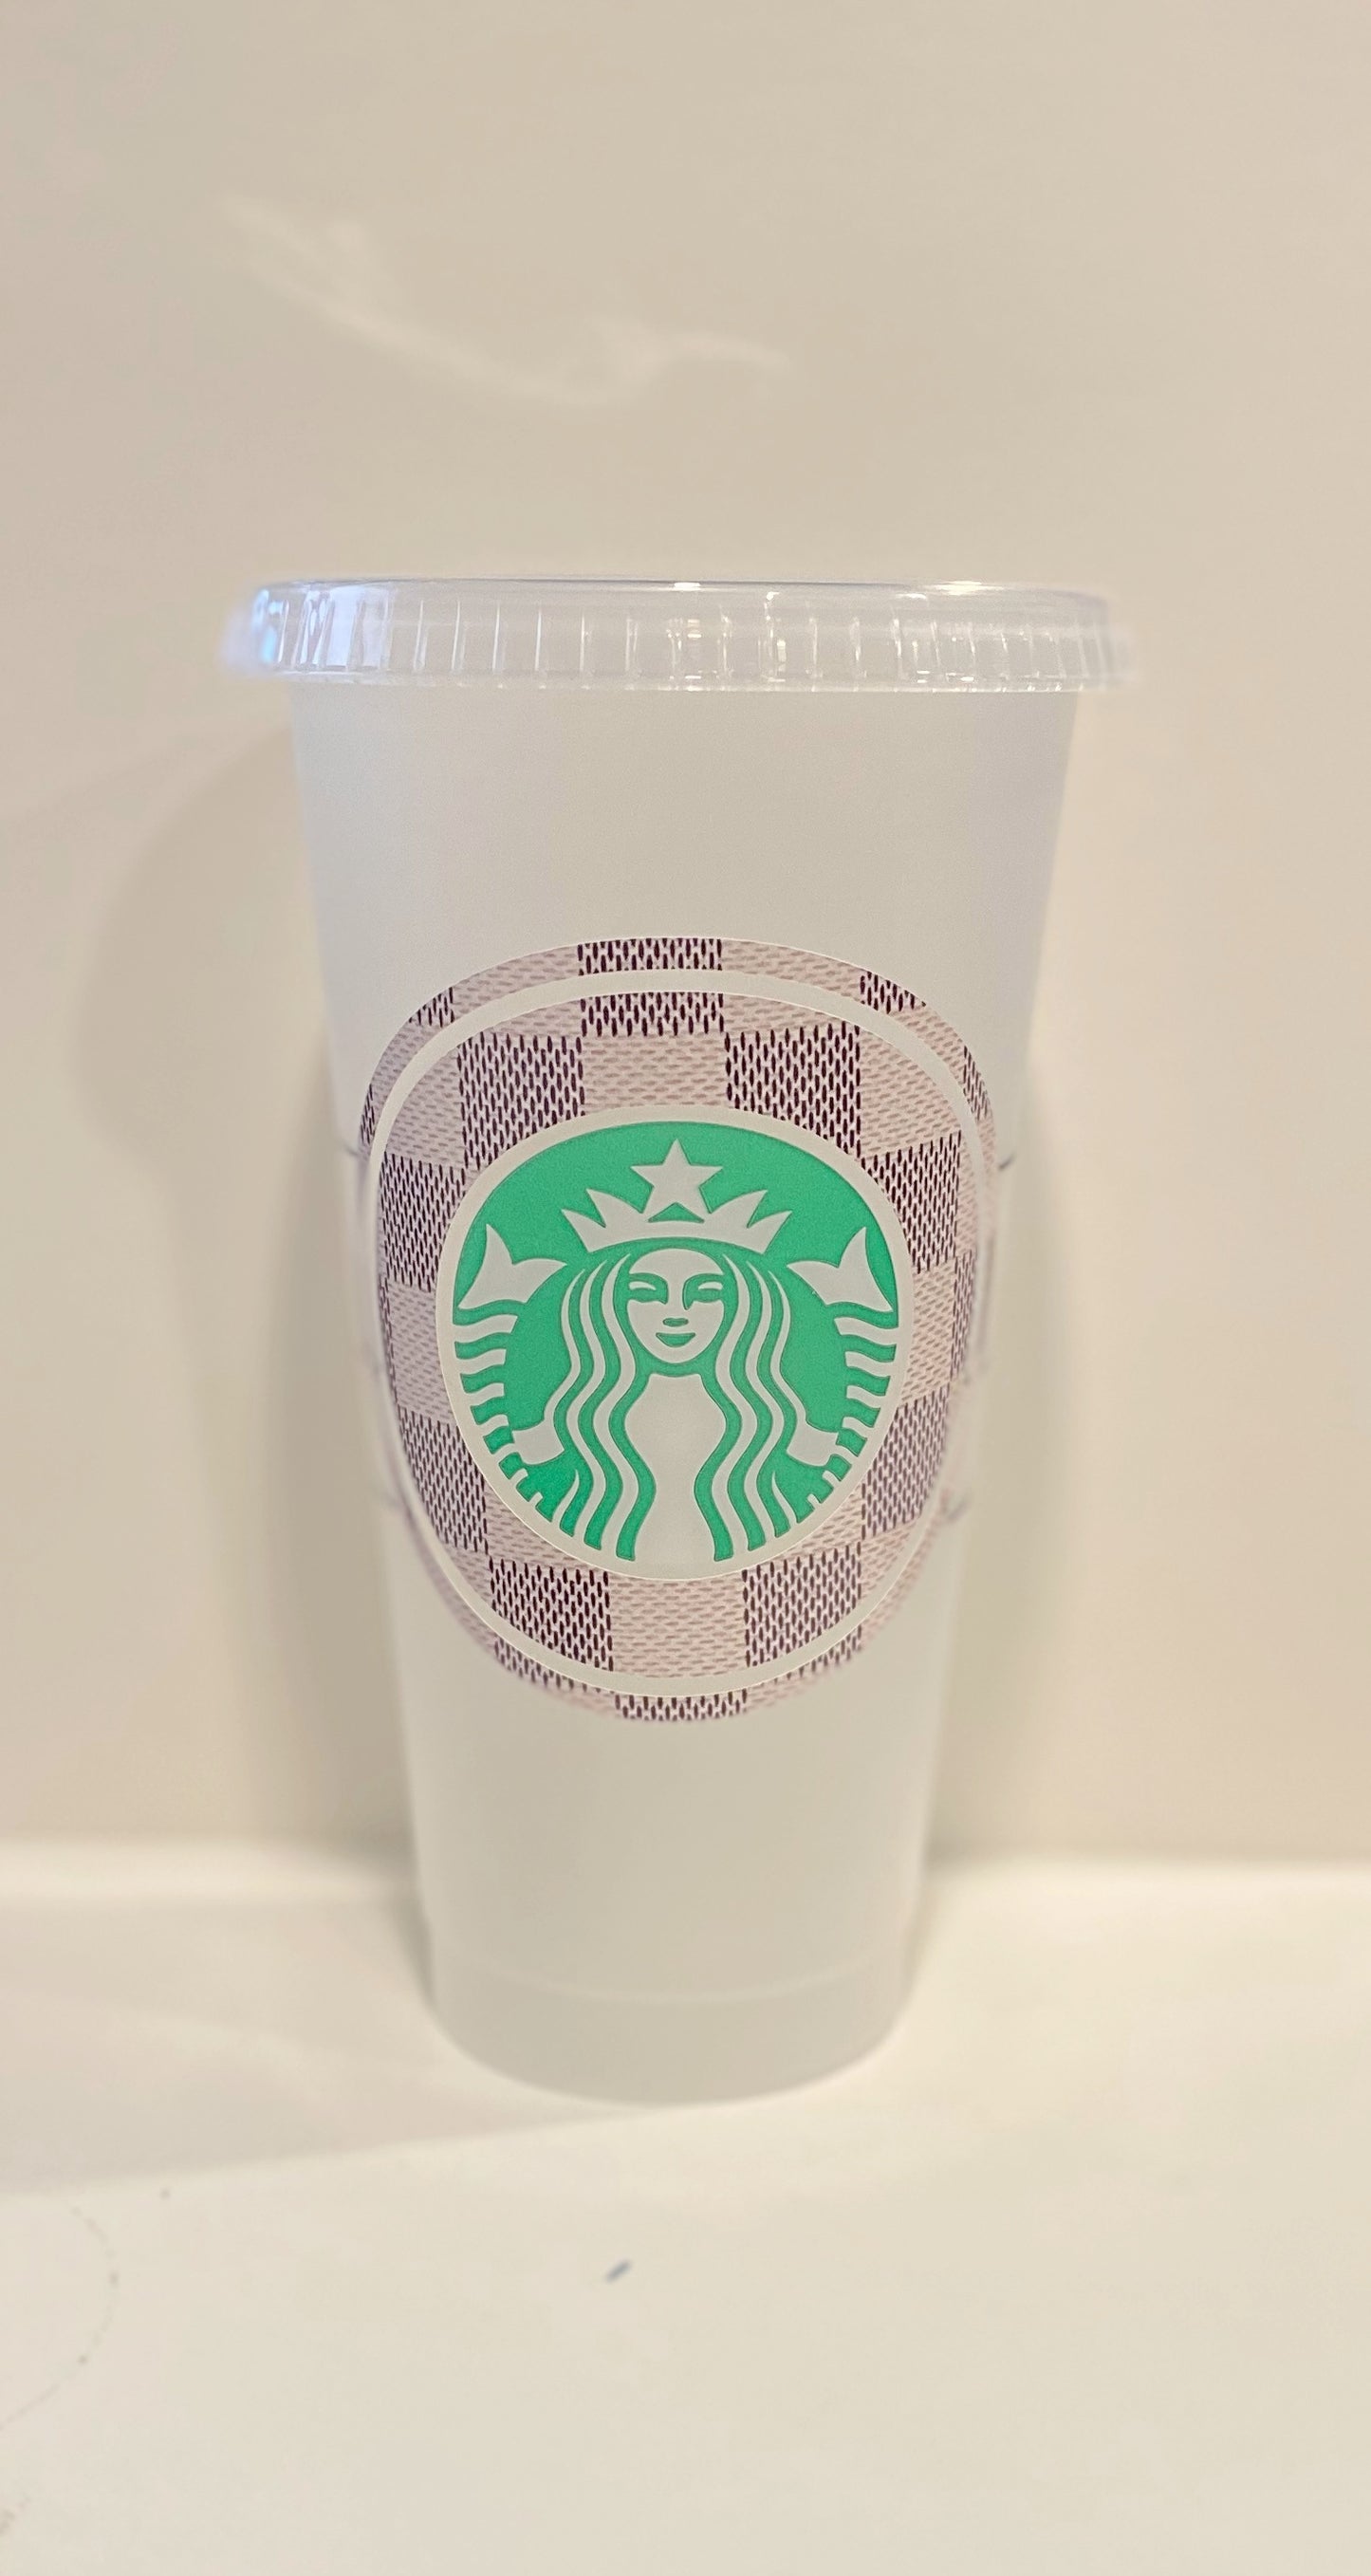 Designer Starbucks Reusable Luxury Cup With Lid and Straw 